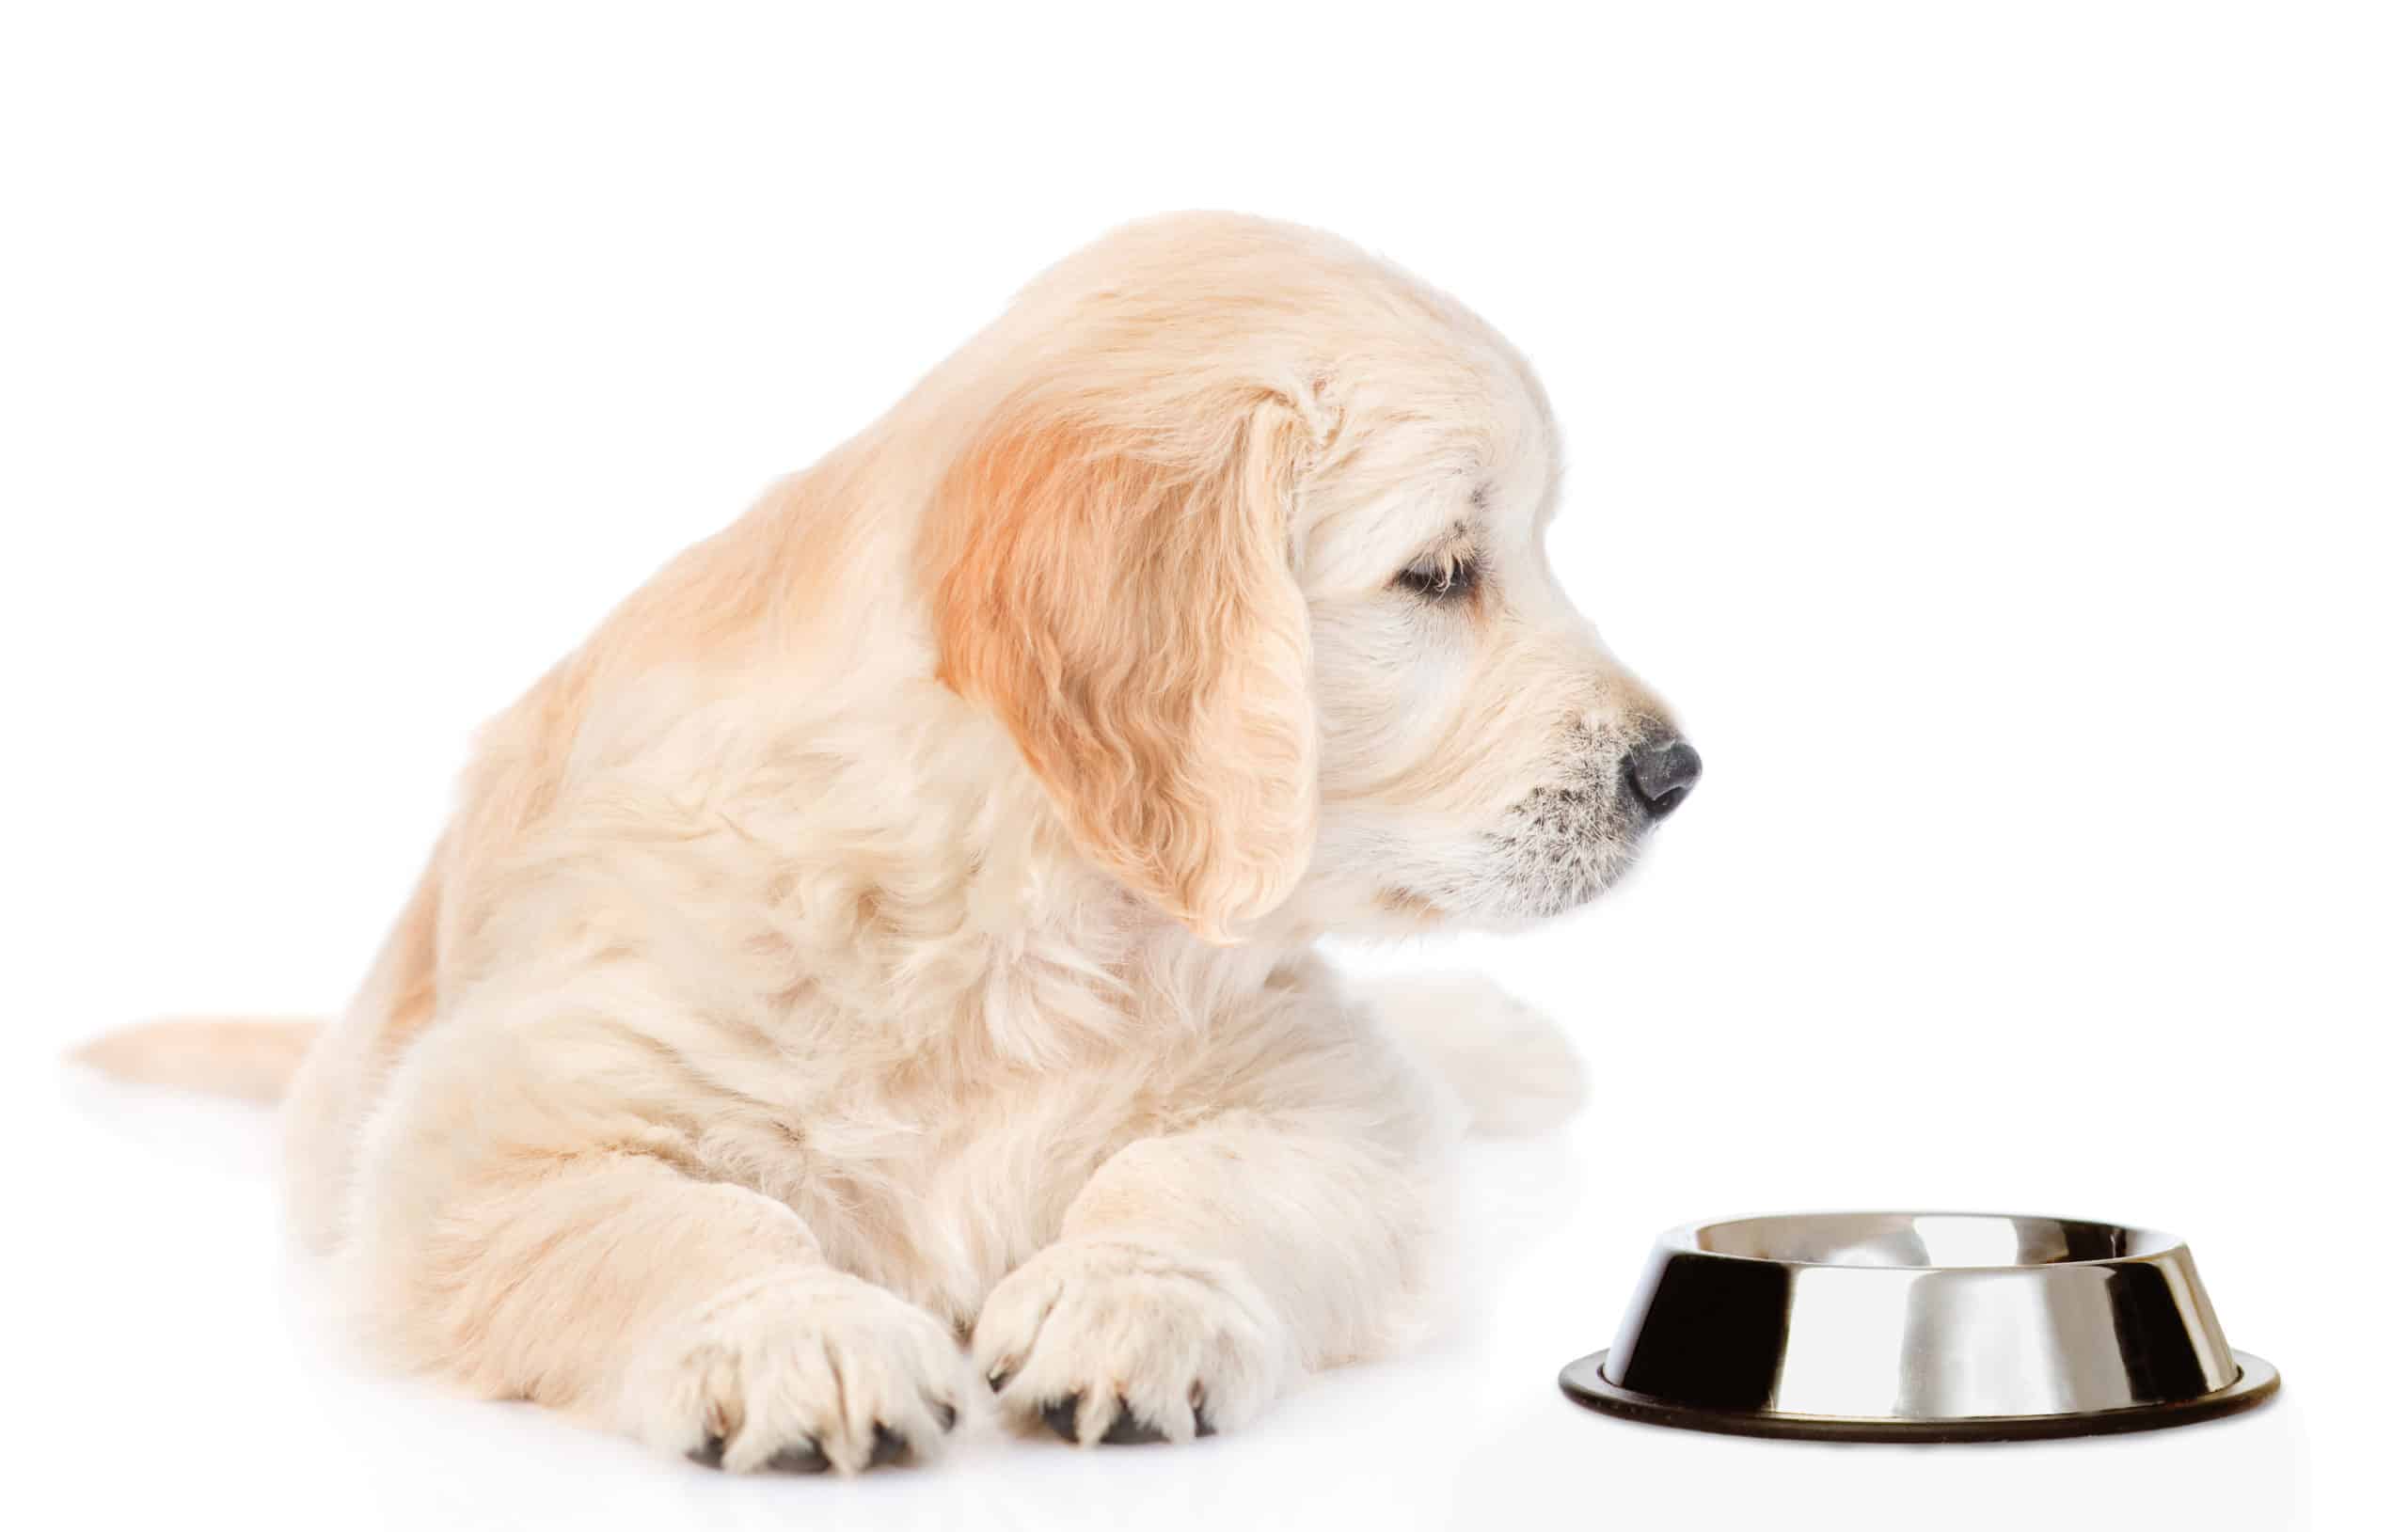 Why won’t my dog eat after being spayed or neutered?